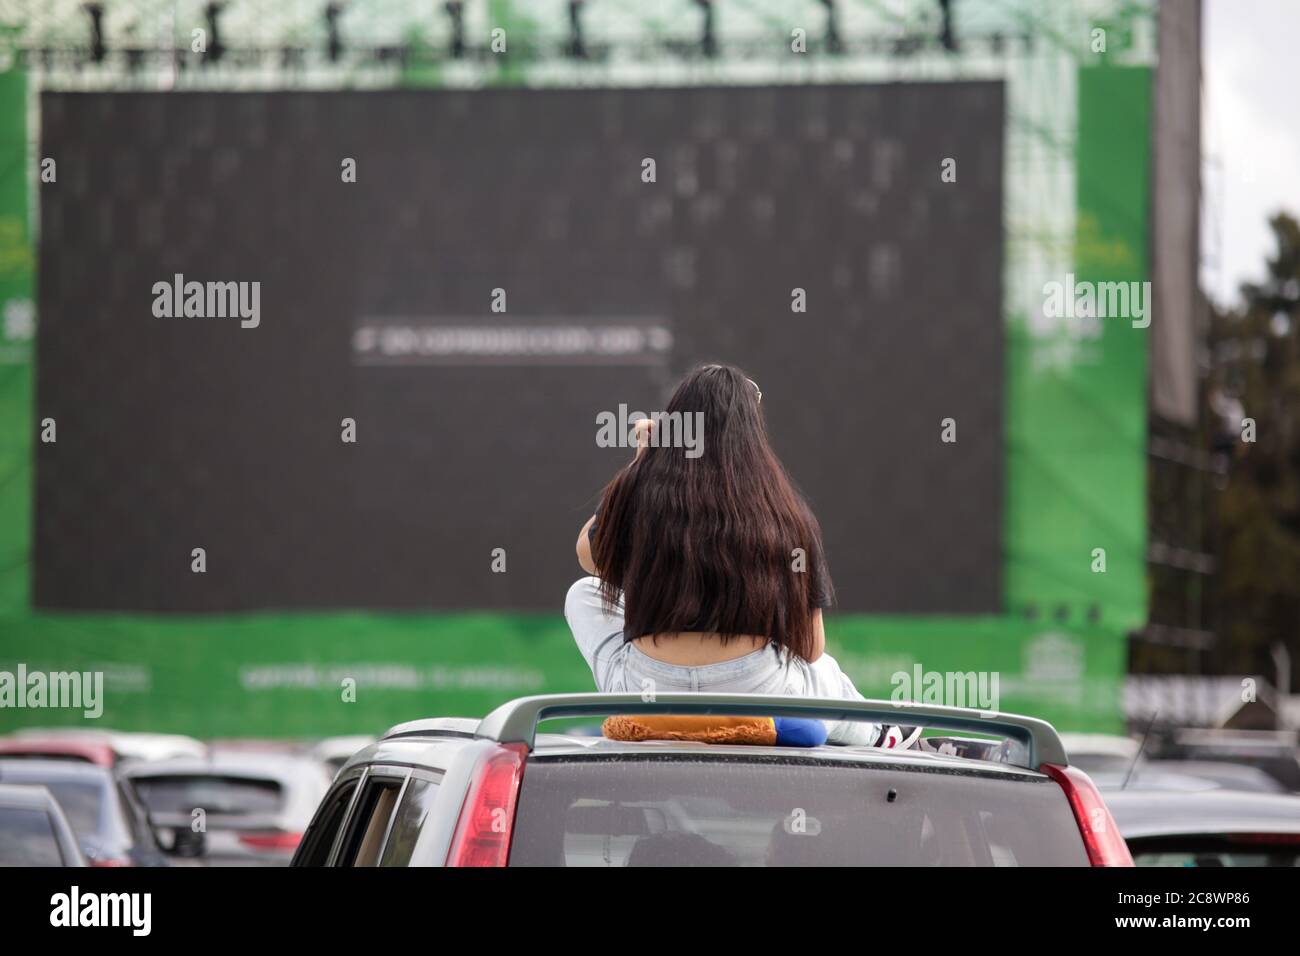 Mexico City, Mexico. 26th July, 2020. A woman sits on top of her car while watching a movie at a drive-in movie theater in Mexico City, Mexico, July 26, 2020. Drive-in movie theaters have become sought-after in Mexico during the COVID-19 pandemic. Credit: Francisco Canedo/Xinhua/Alamy Live News Stock Photo